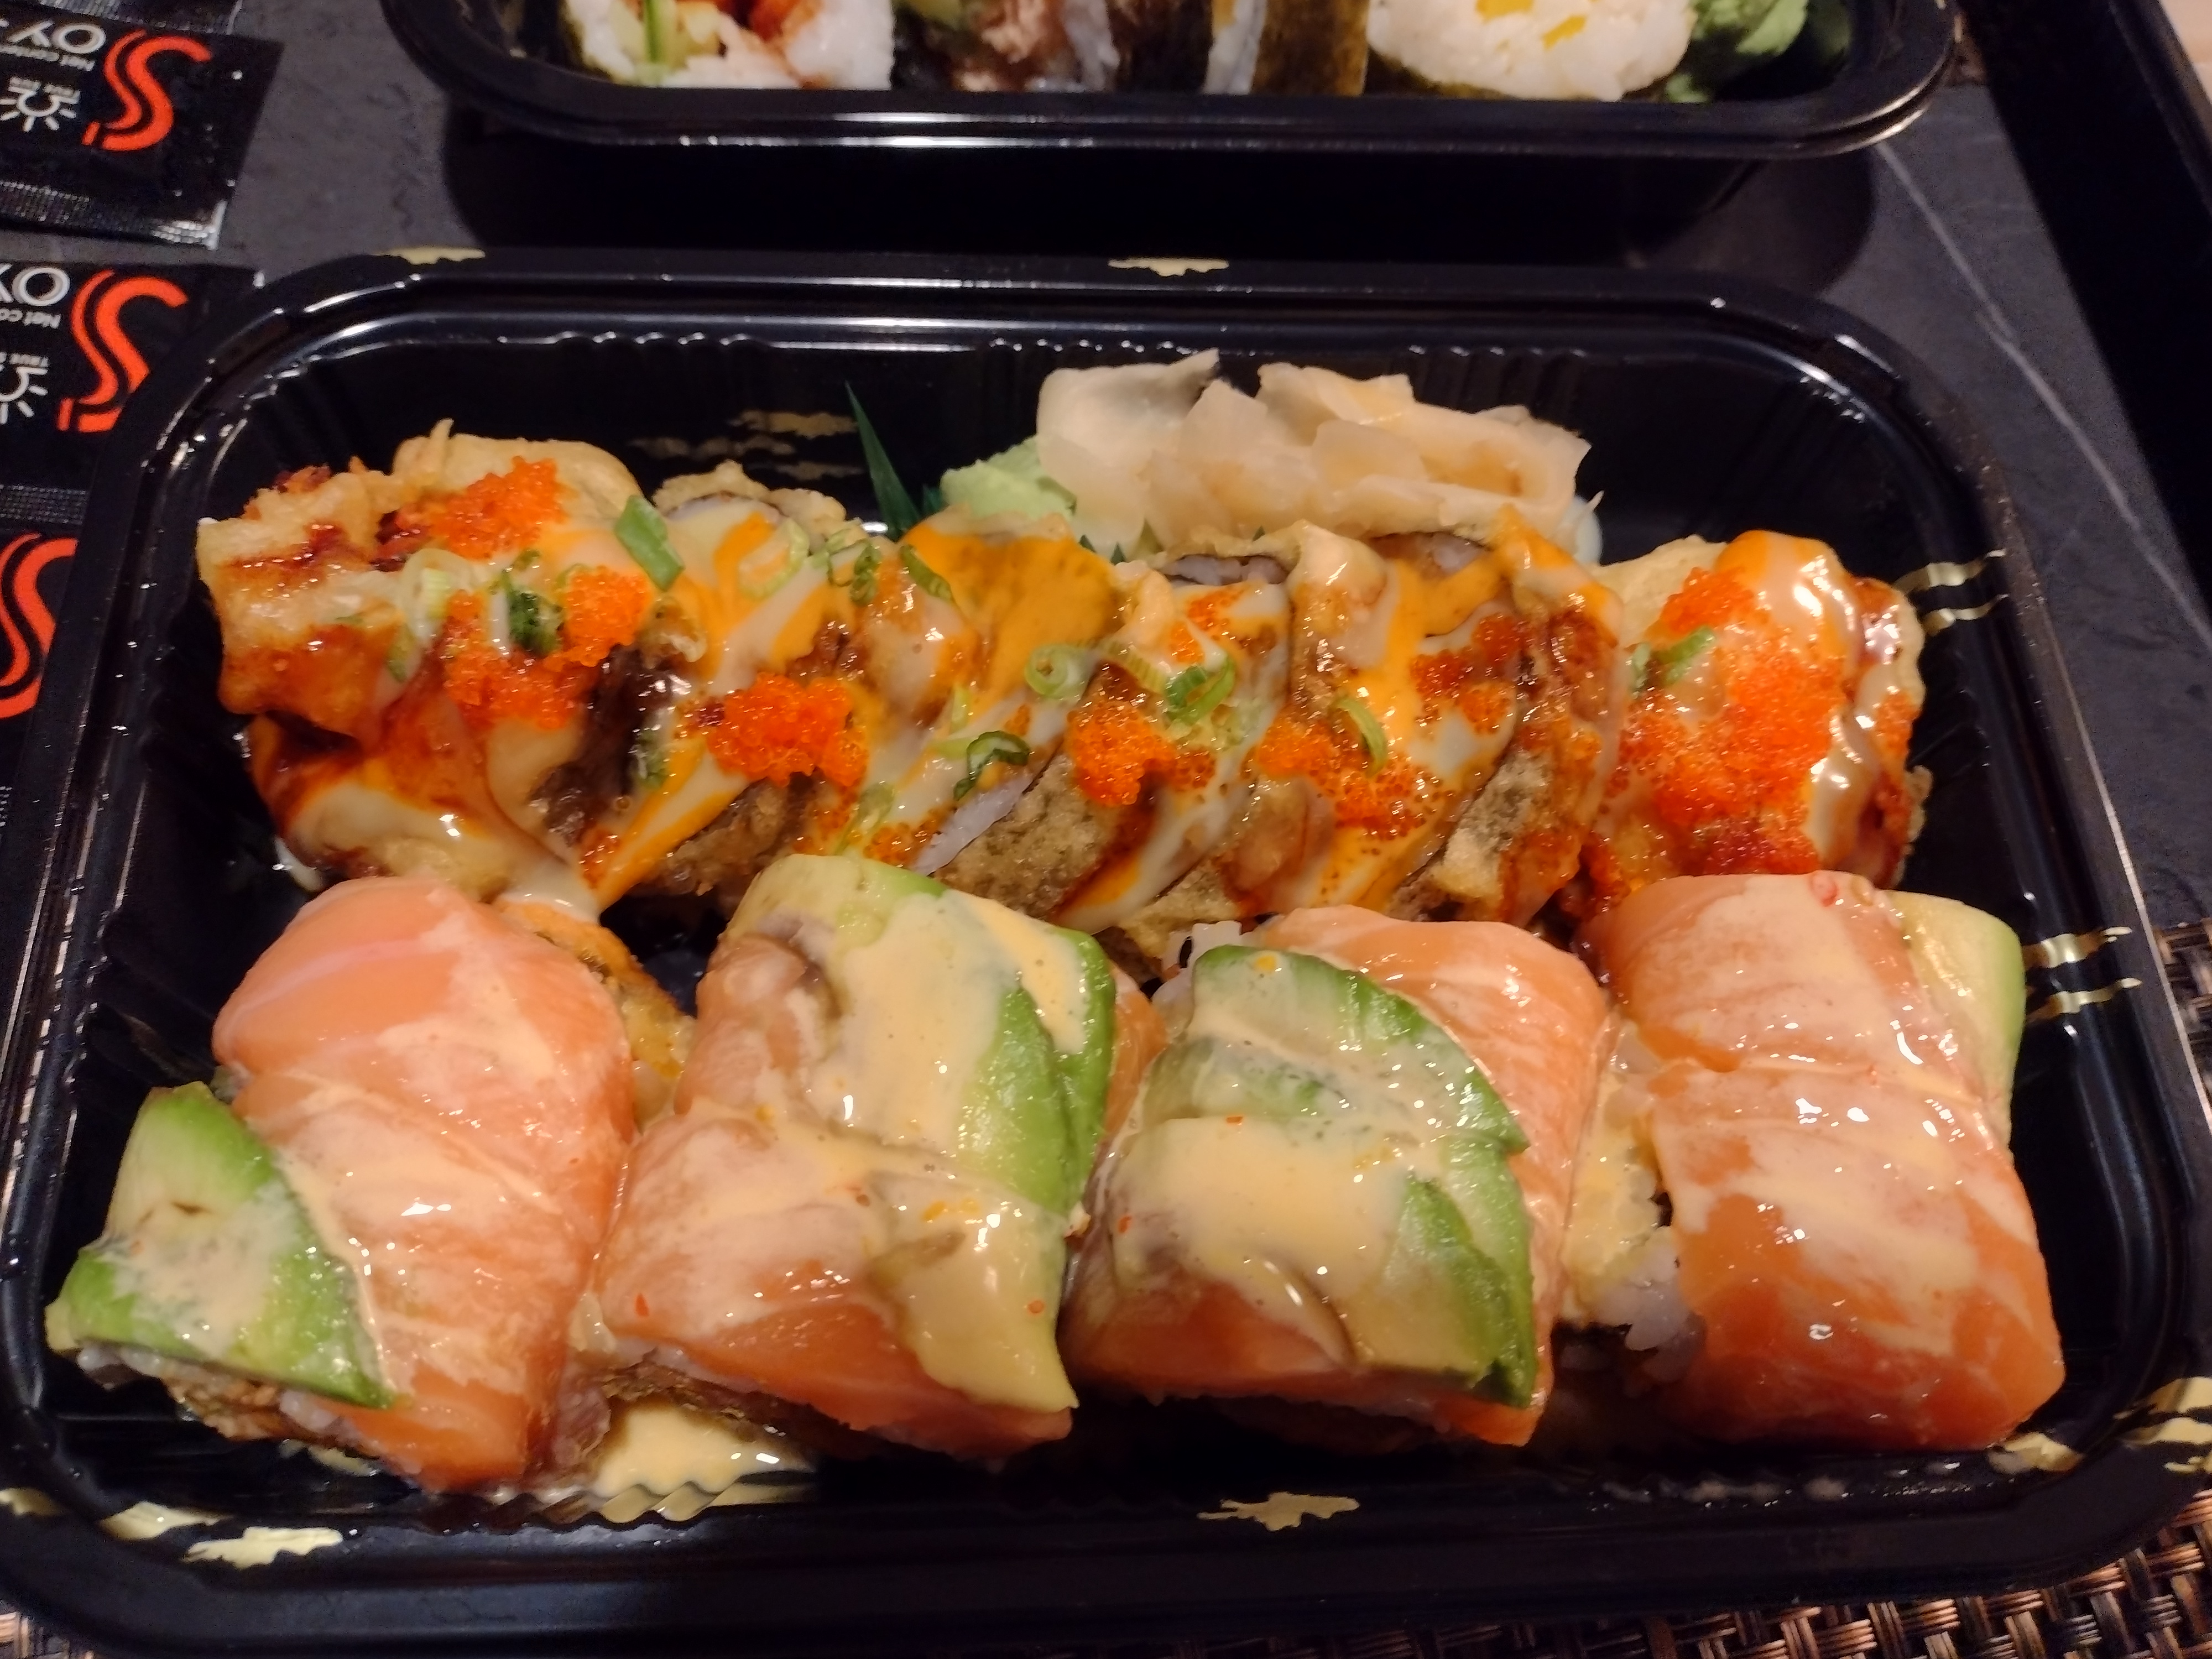 In a takeout container, there are two saucy sushi rolls from Sushi Man. Photo by Melkior Ornik.